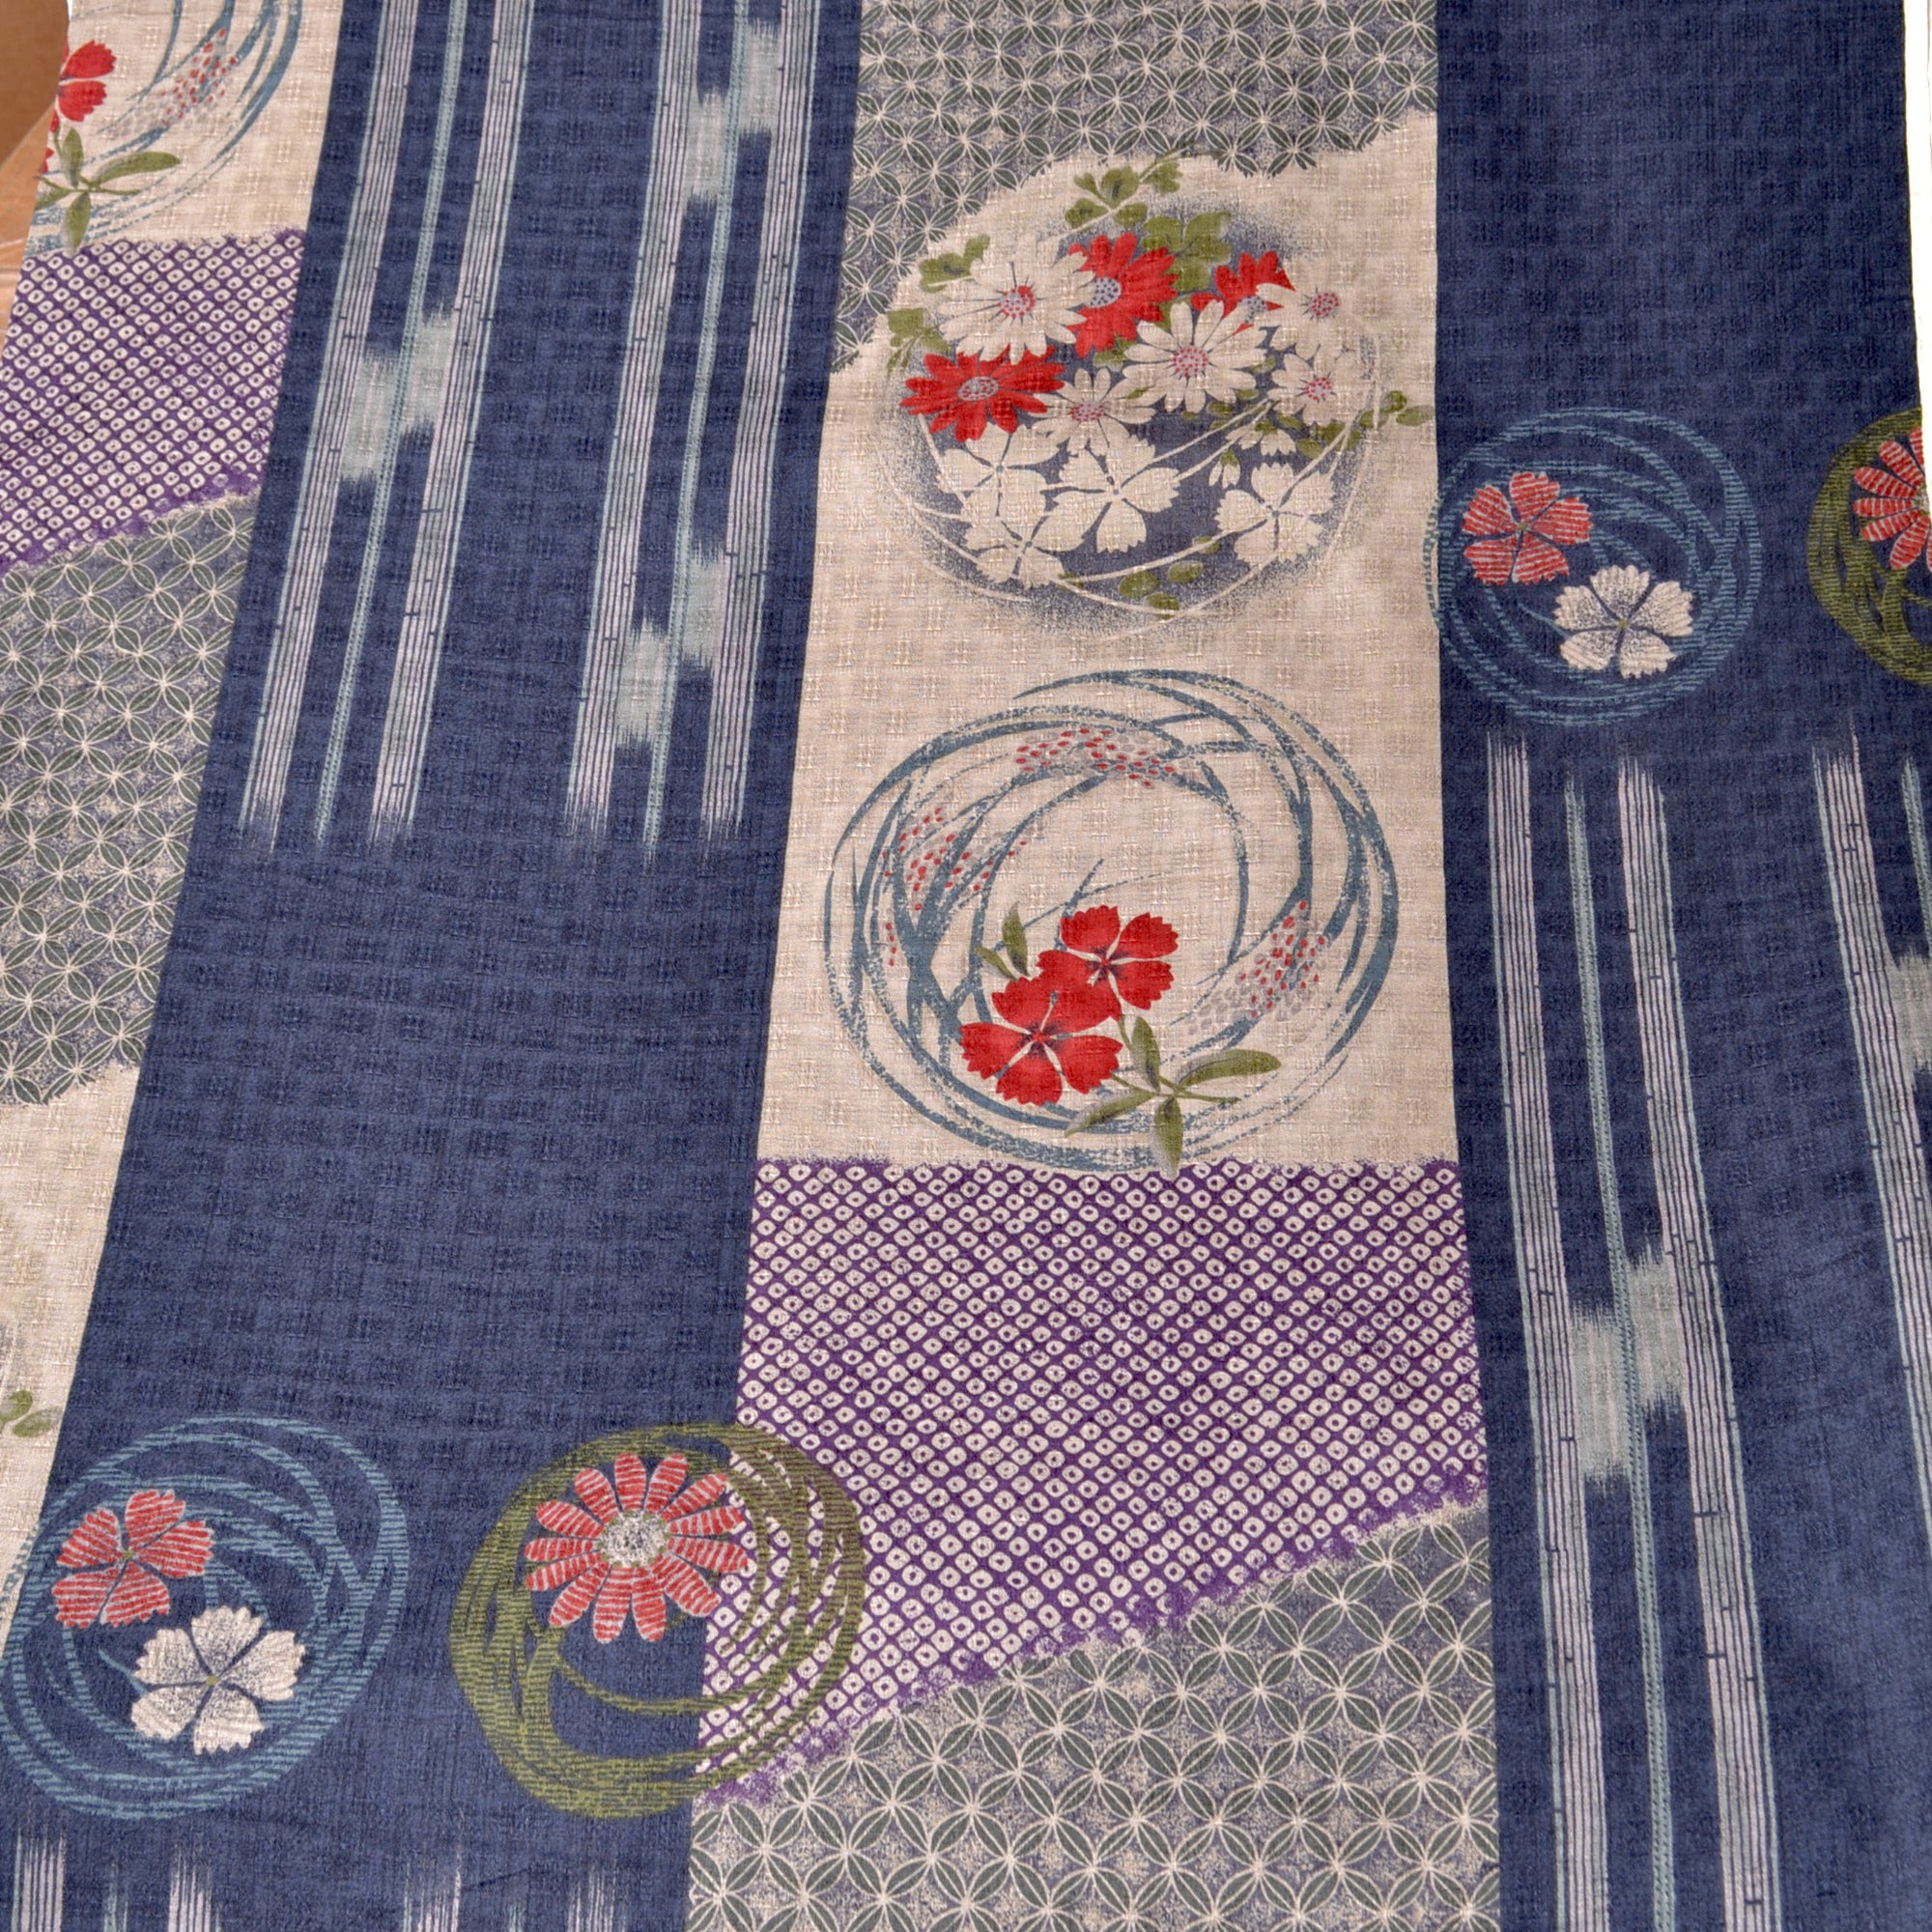 Japanese cotton Fabric, Sewing, Clothing, Quilting,  